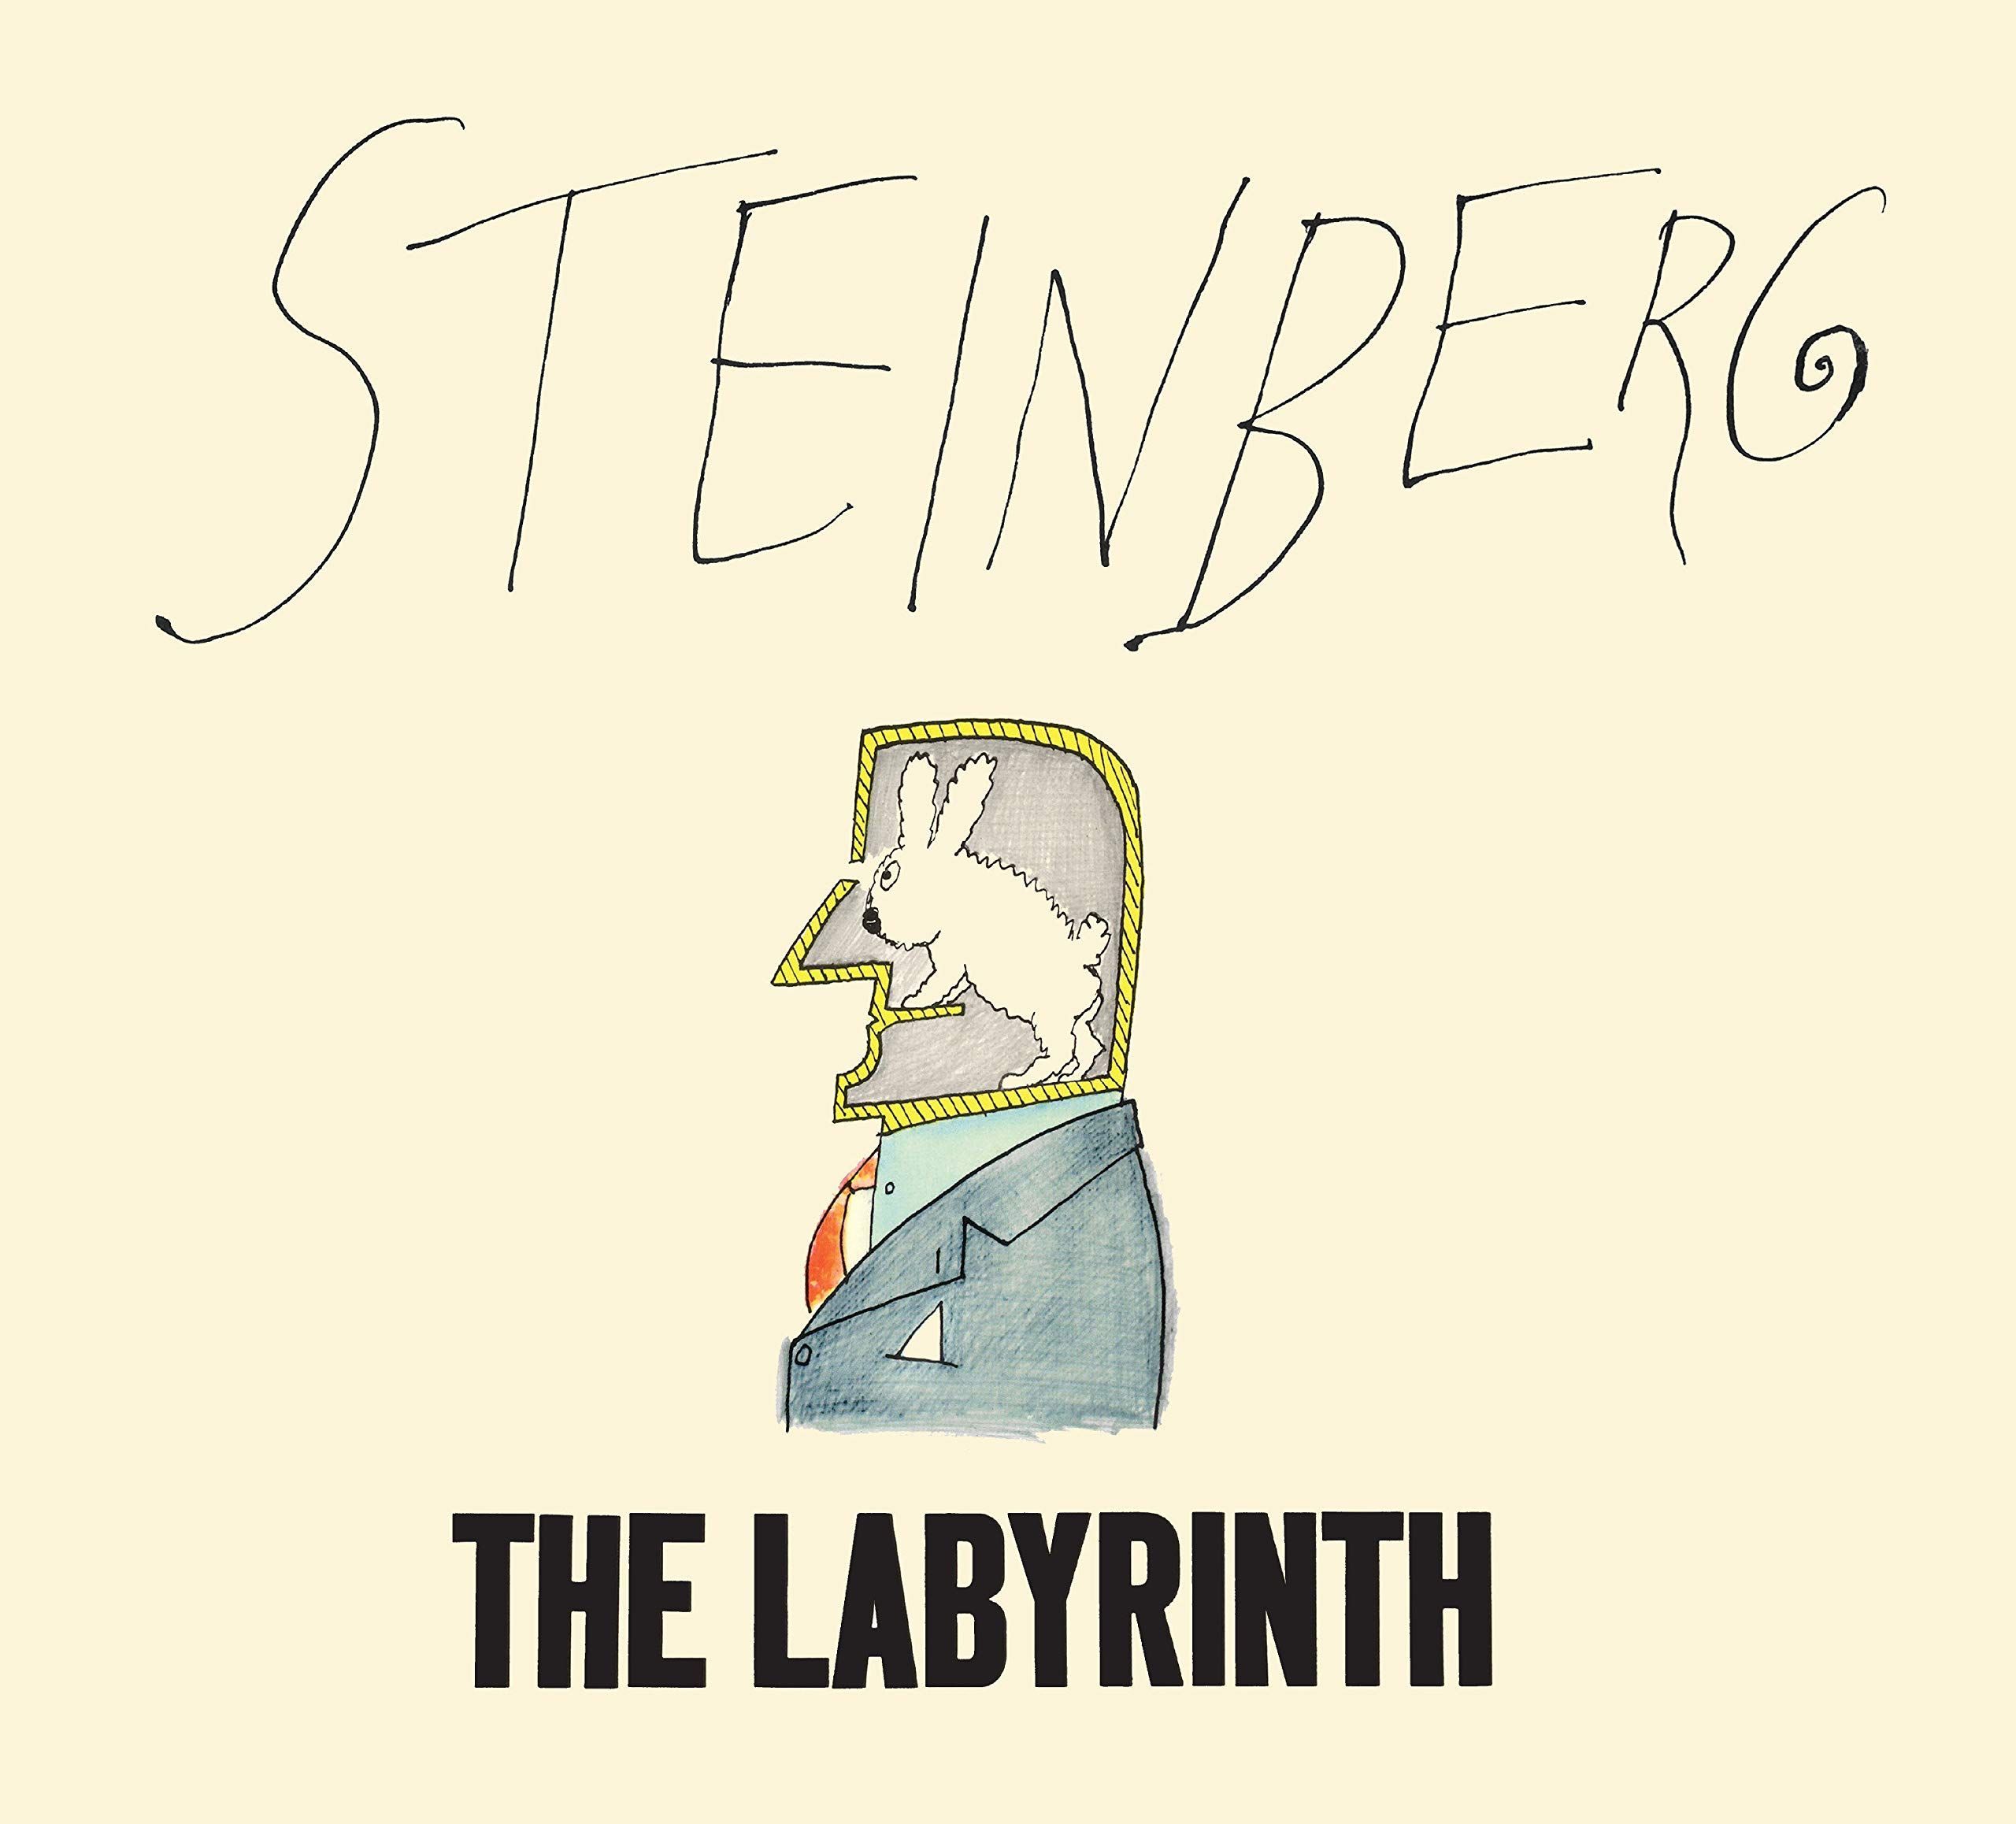 The Life and Death of a Line: Saul Steinberg’s “The Labyrinth”